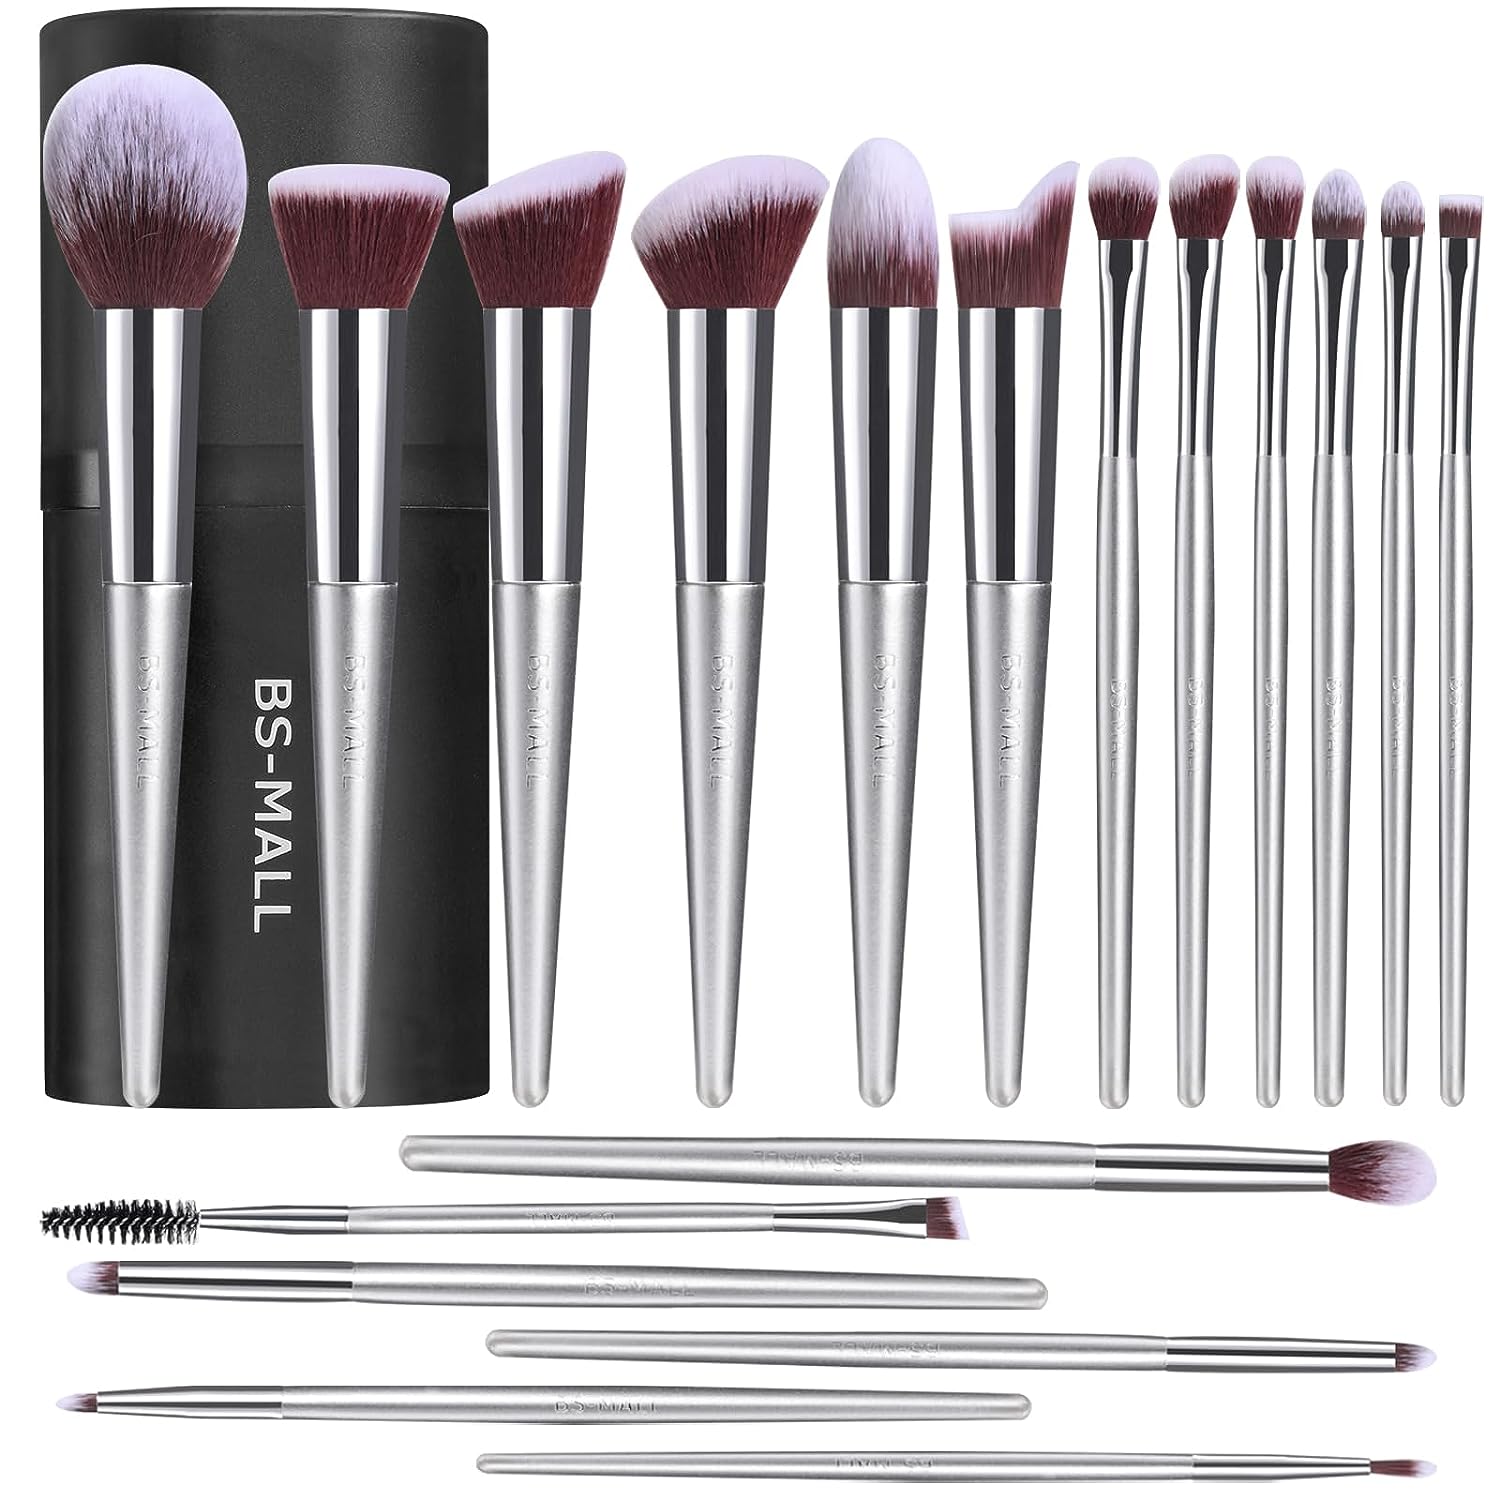 BS-MALL Makeup Brush Set 18 Pcs Premium Synthetic Foundation Powder  Concealers Eye shadows Blush Makeup Brushes with black case (A-Champagne)